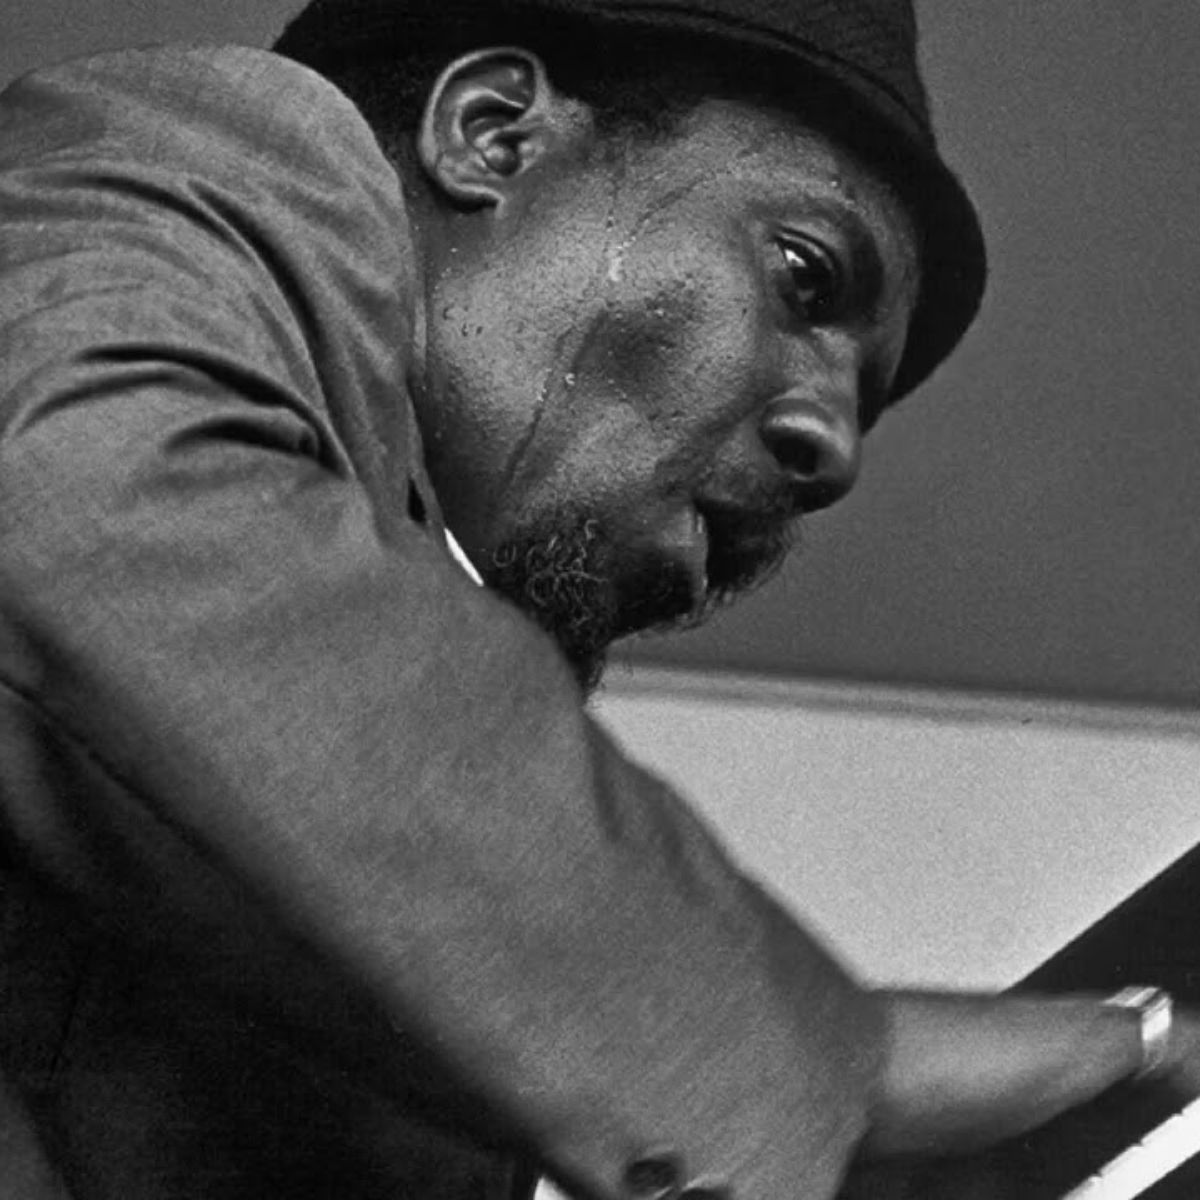 One of Thelonious Monk's performances 